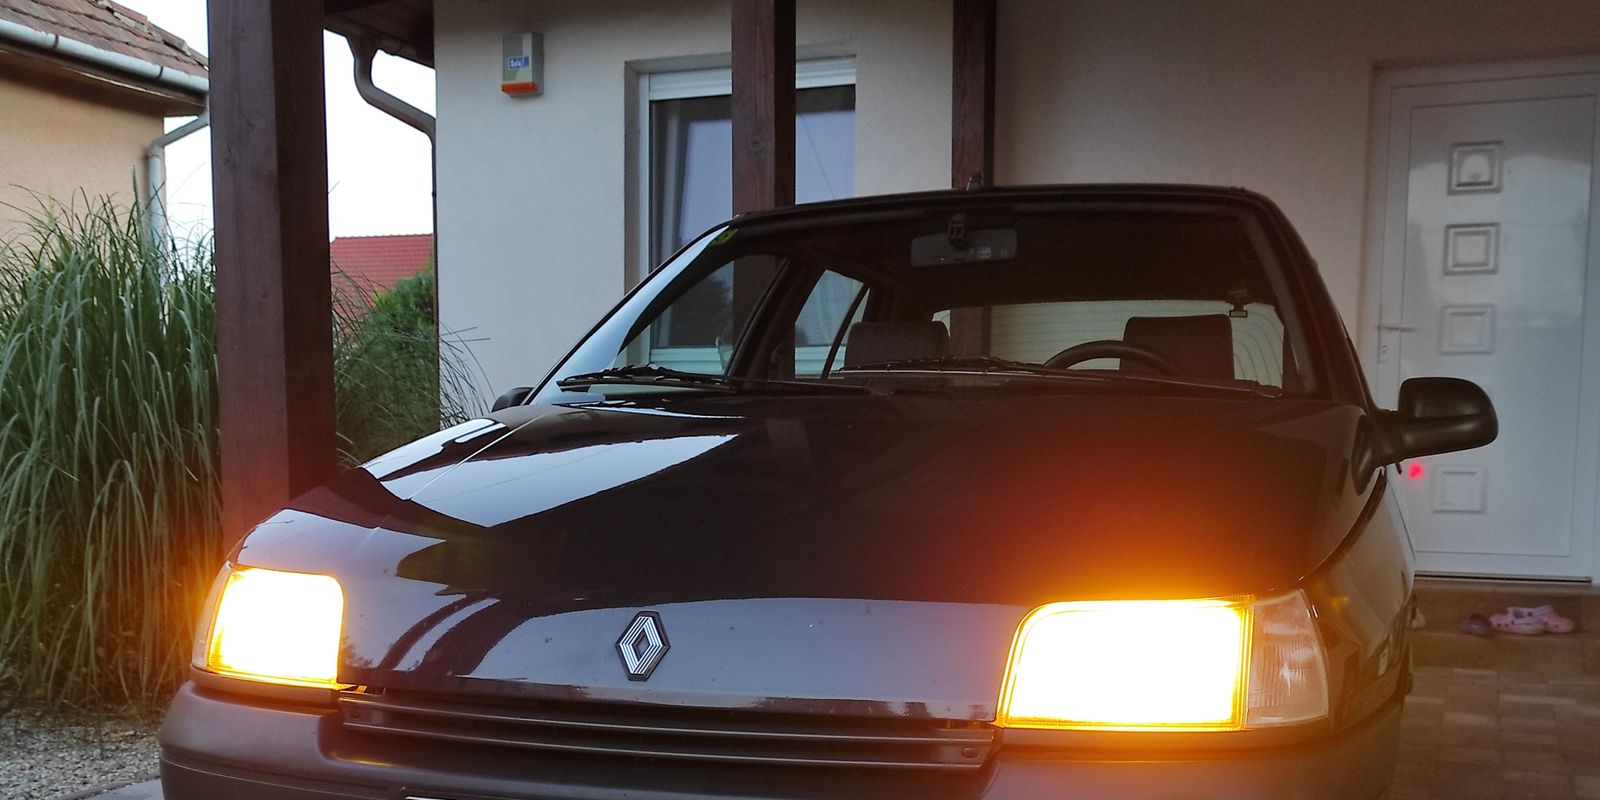 The country's first OT license plate Renault Clio was a true love project